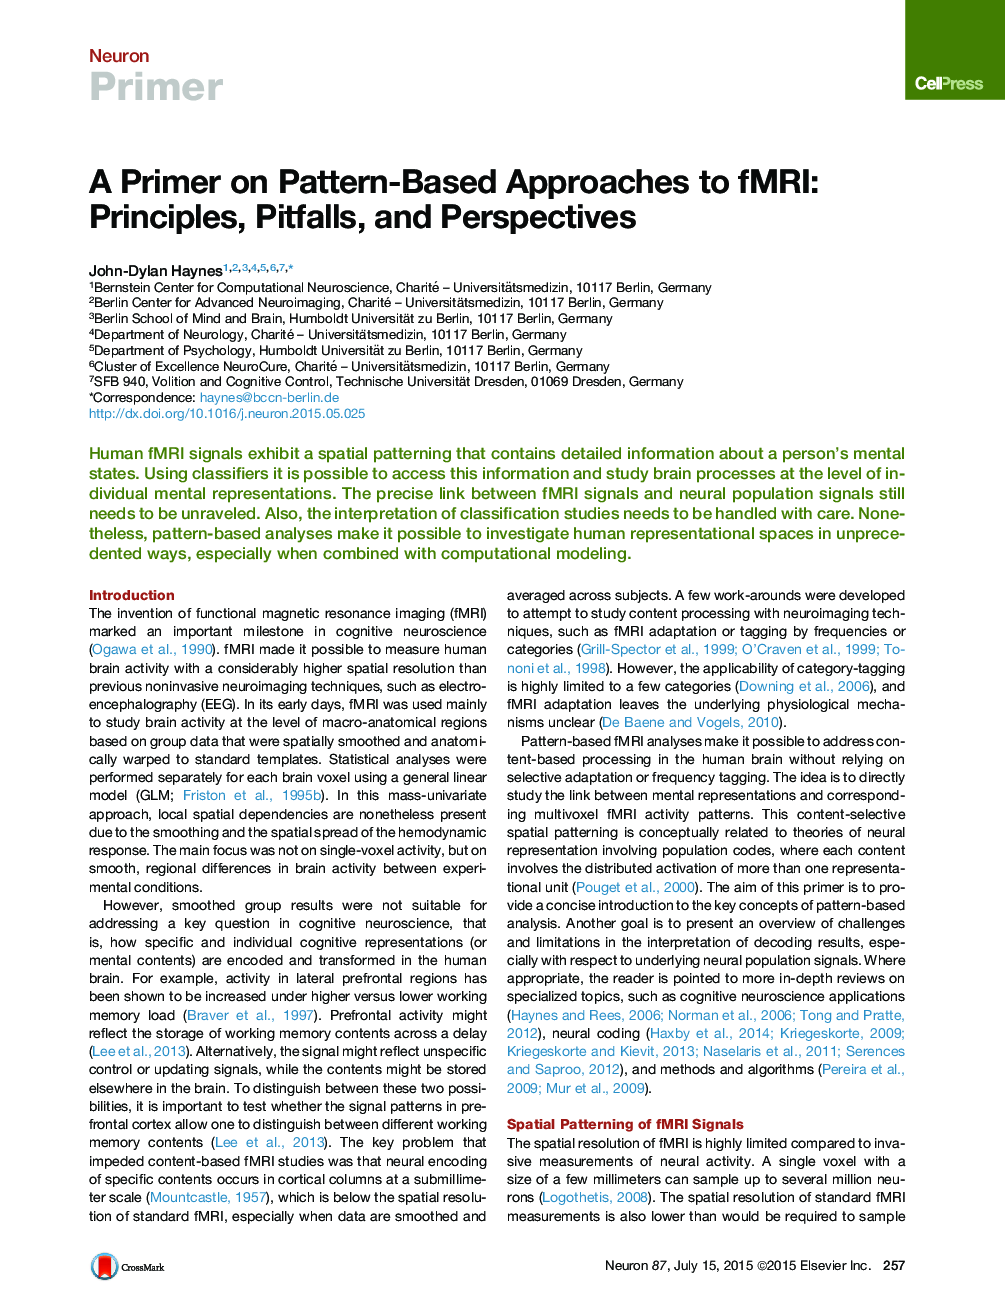 A Primer on Pattern-Based Approaches to fMRI: Principles, Pitfalls, and Perspectives